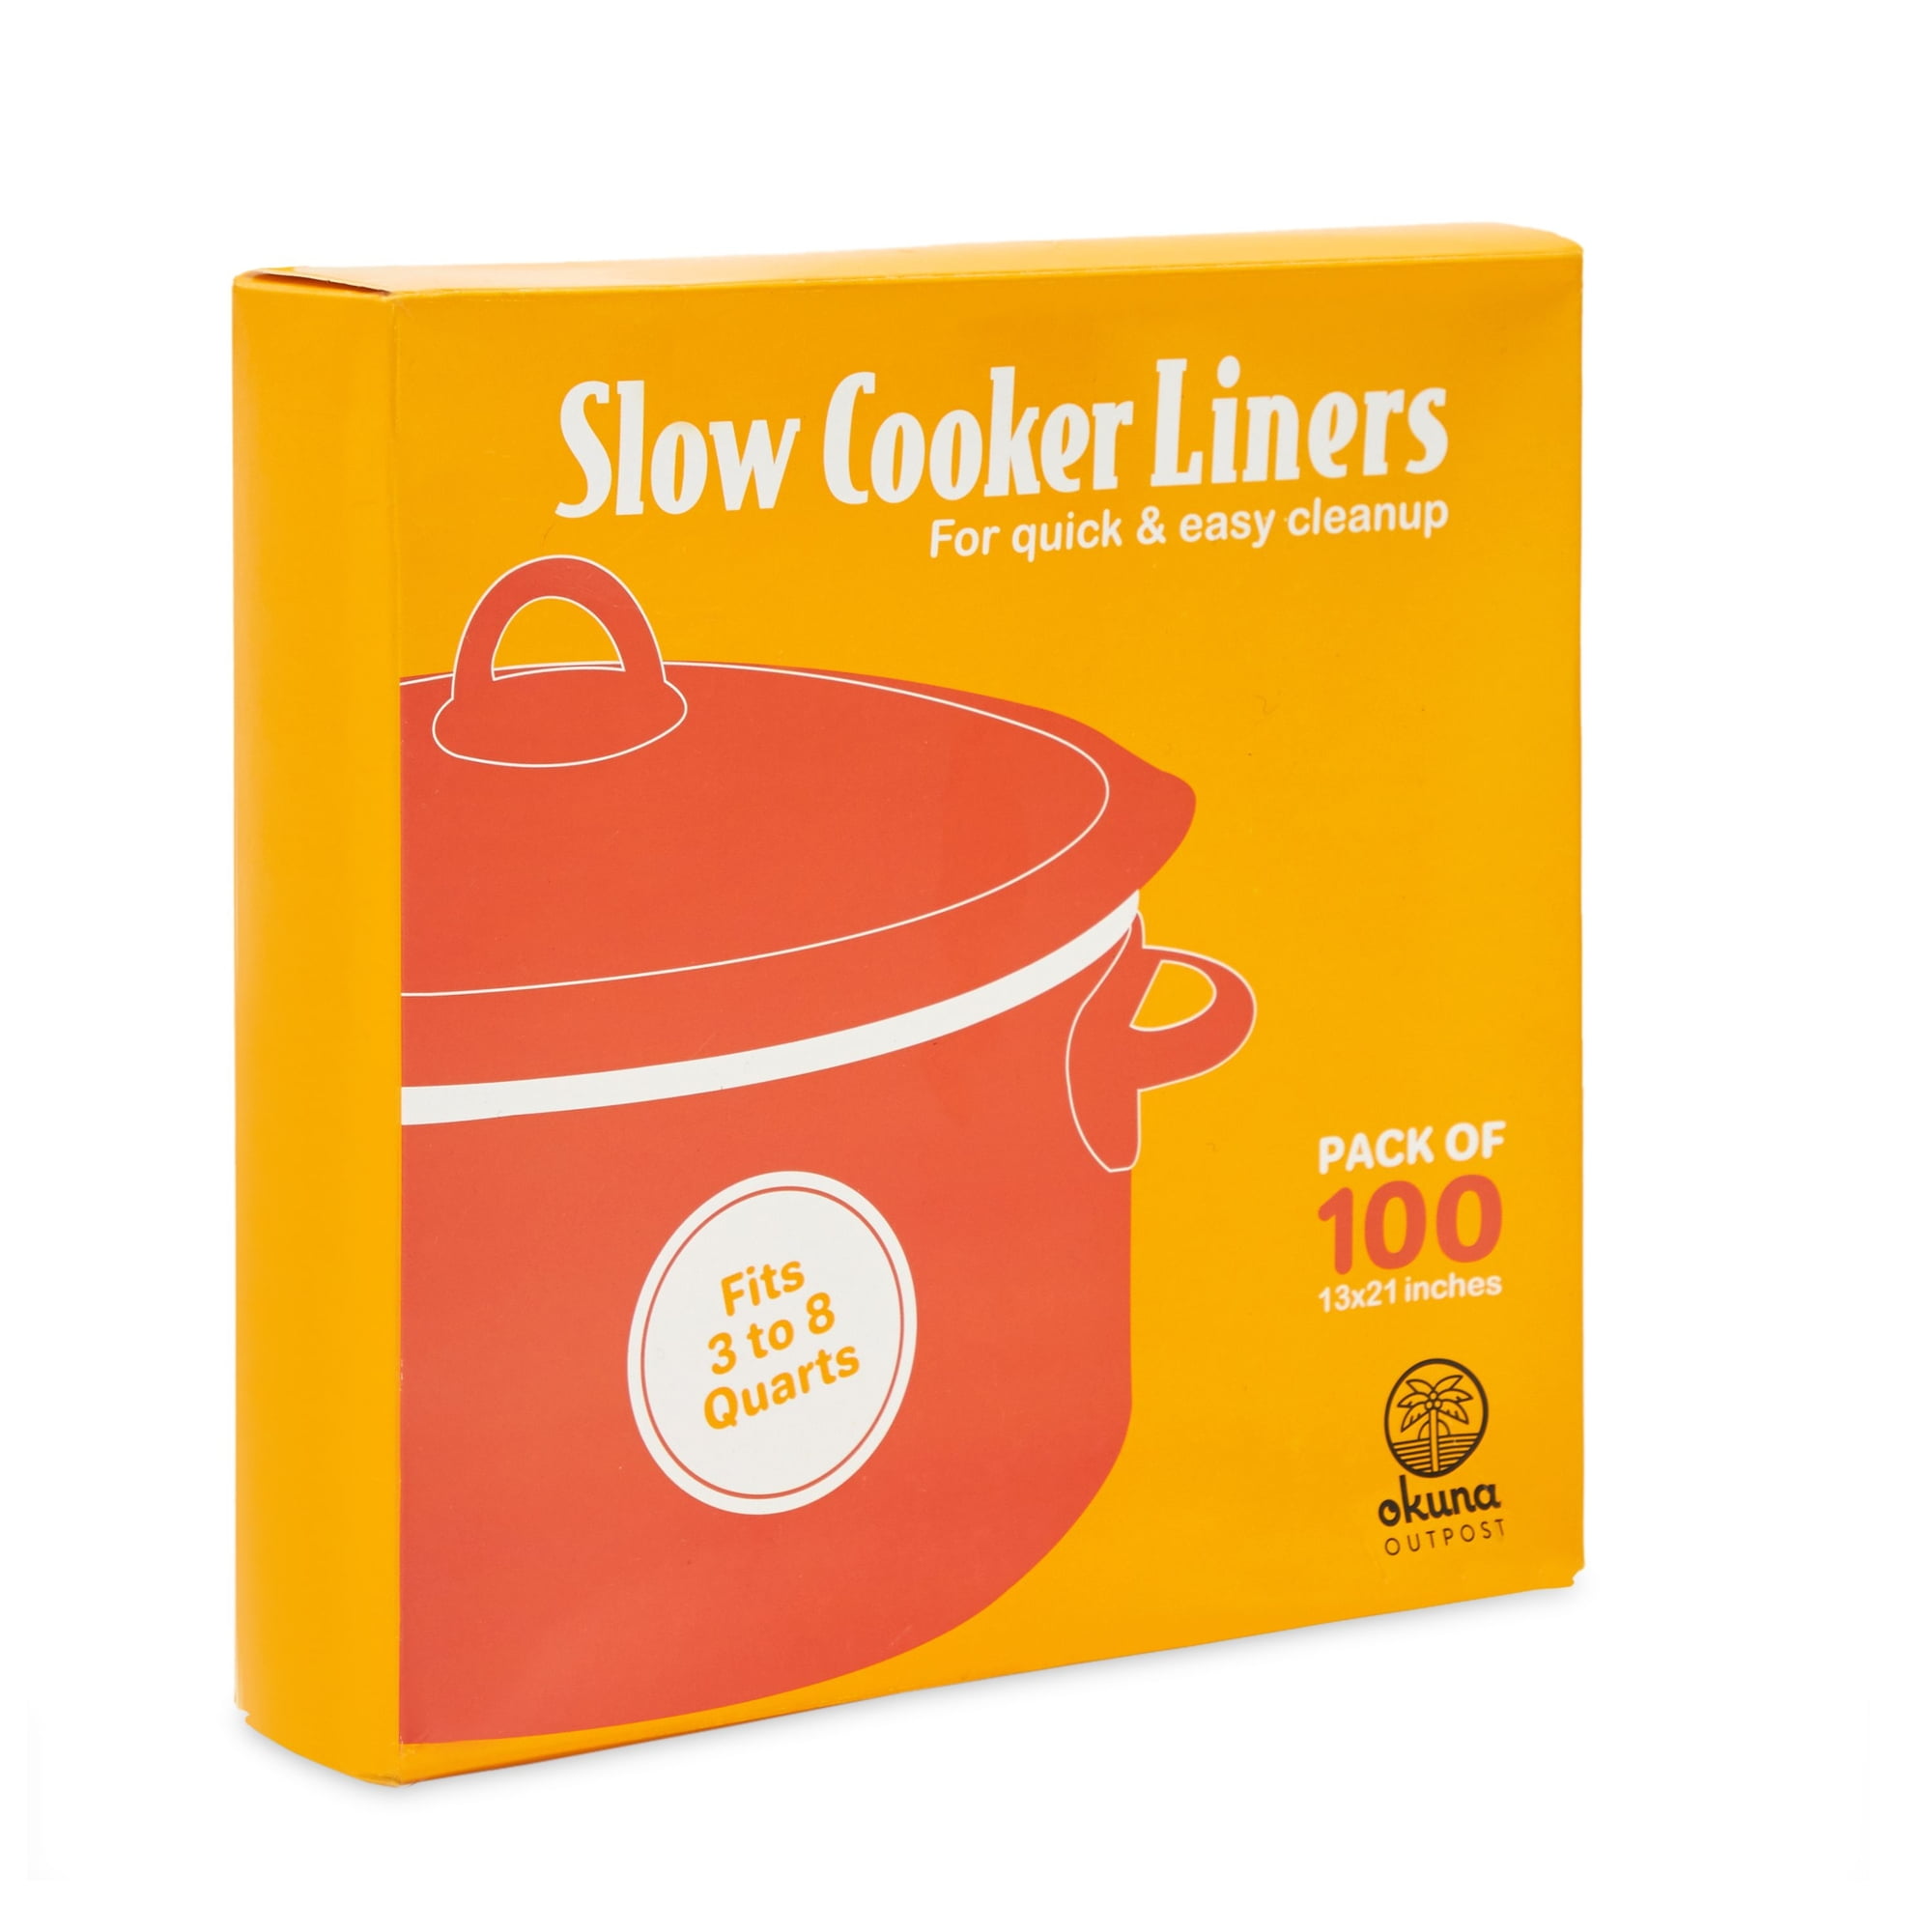 Ecoopts RNAB0BKG697C1 ecoopts slow cooker liners disposable